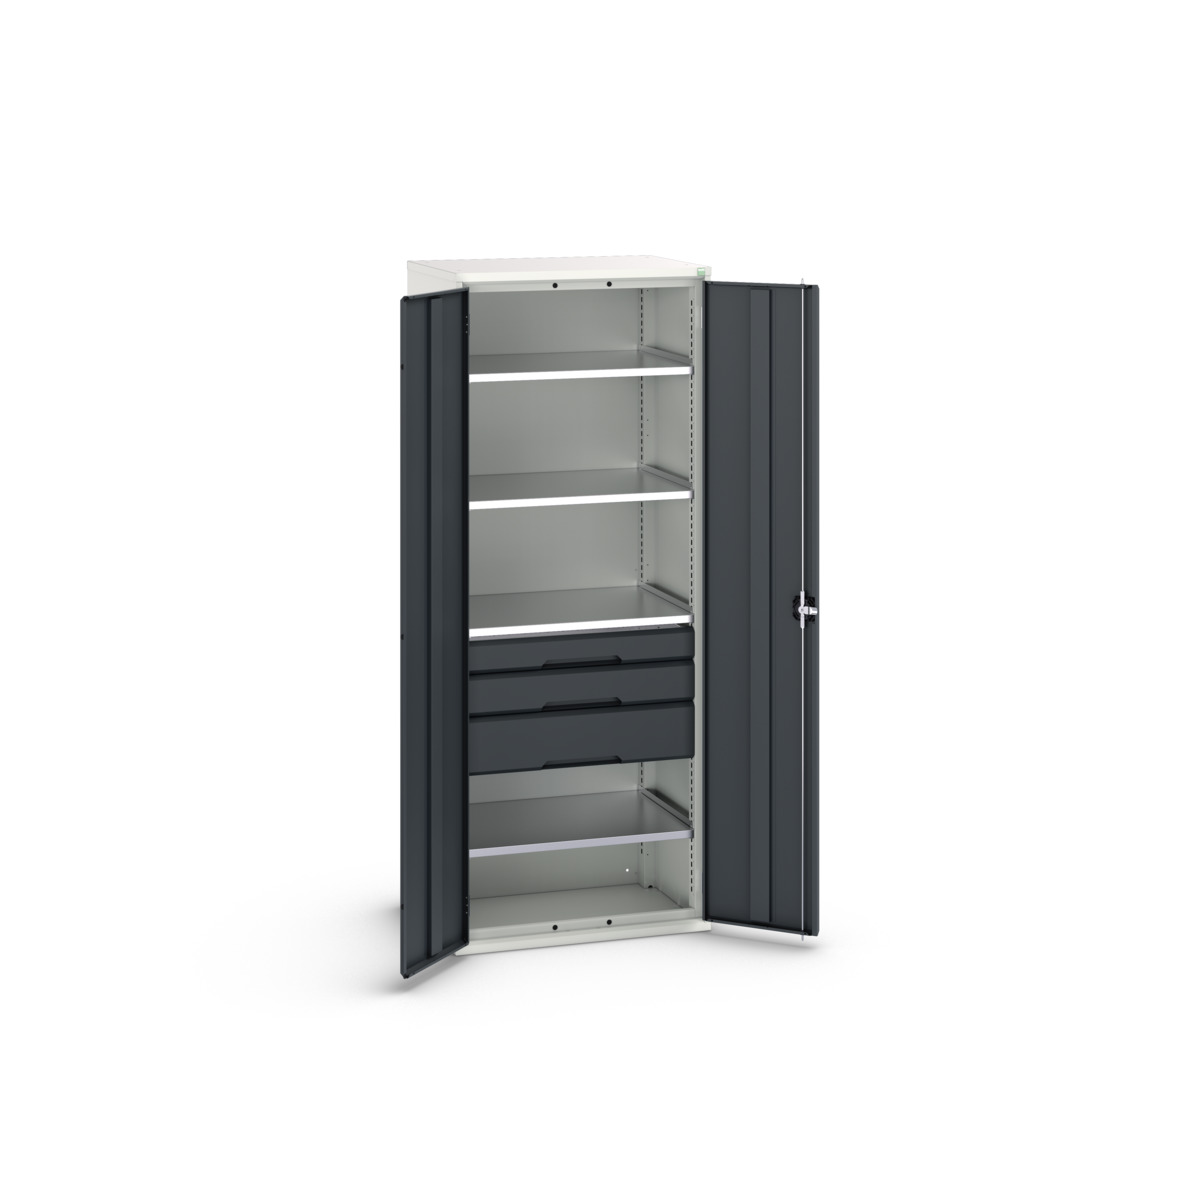 16926456.19 - verso kitted cupboard